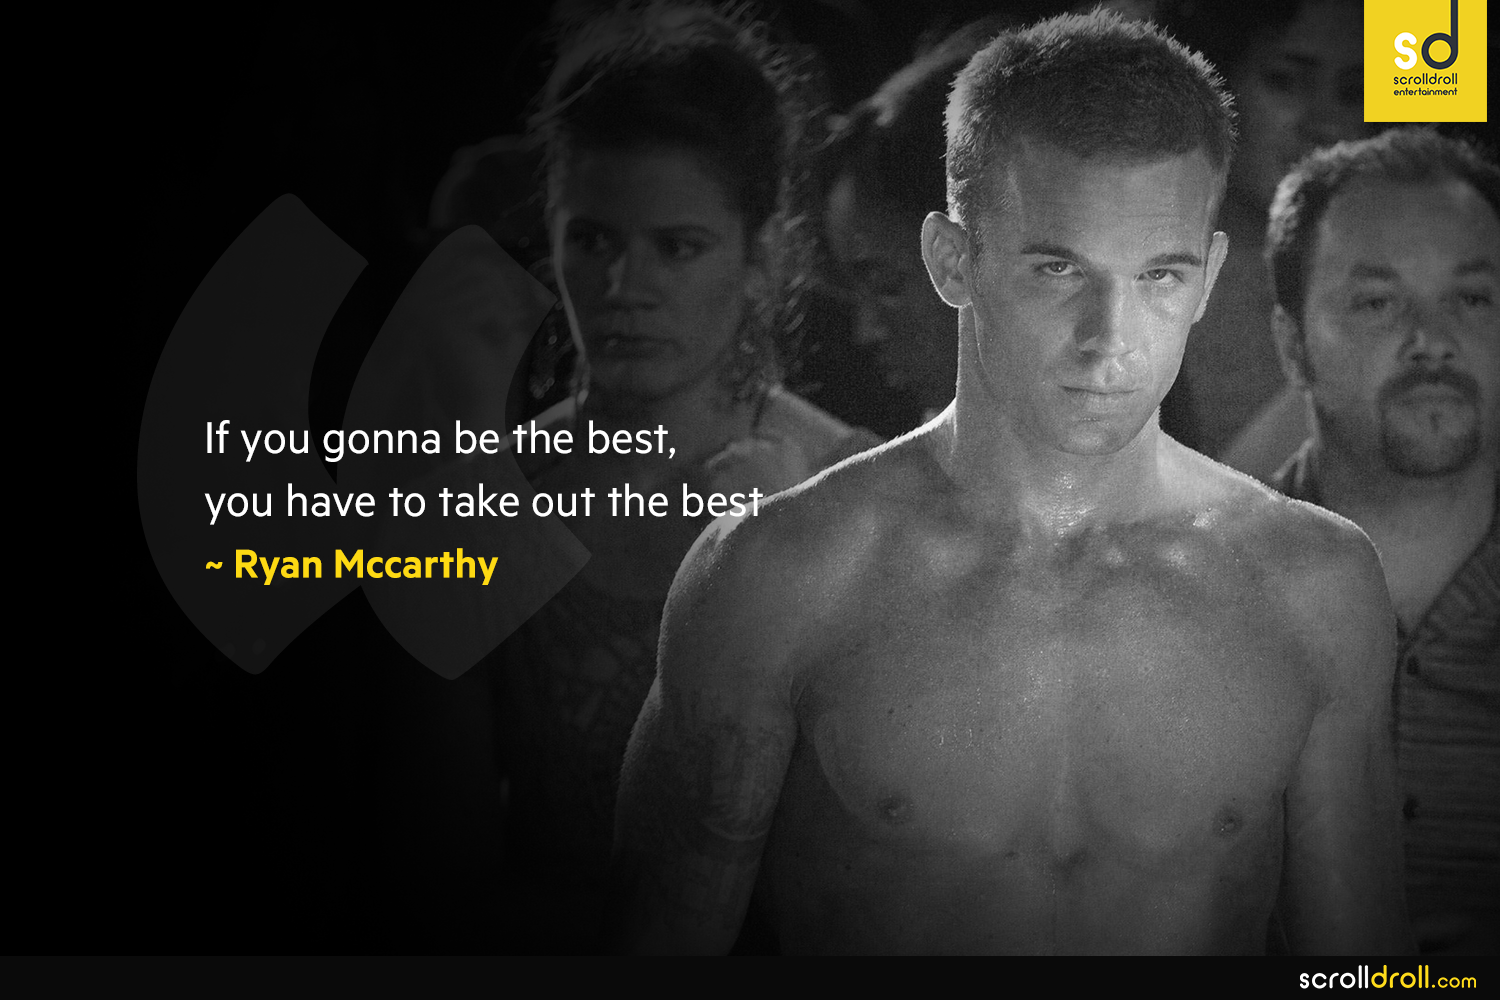 never back down from a fight quotes